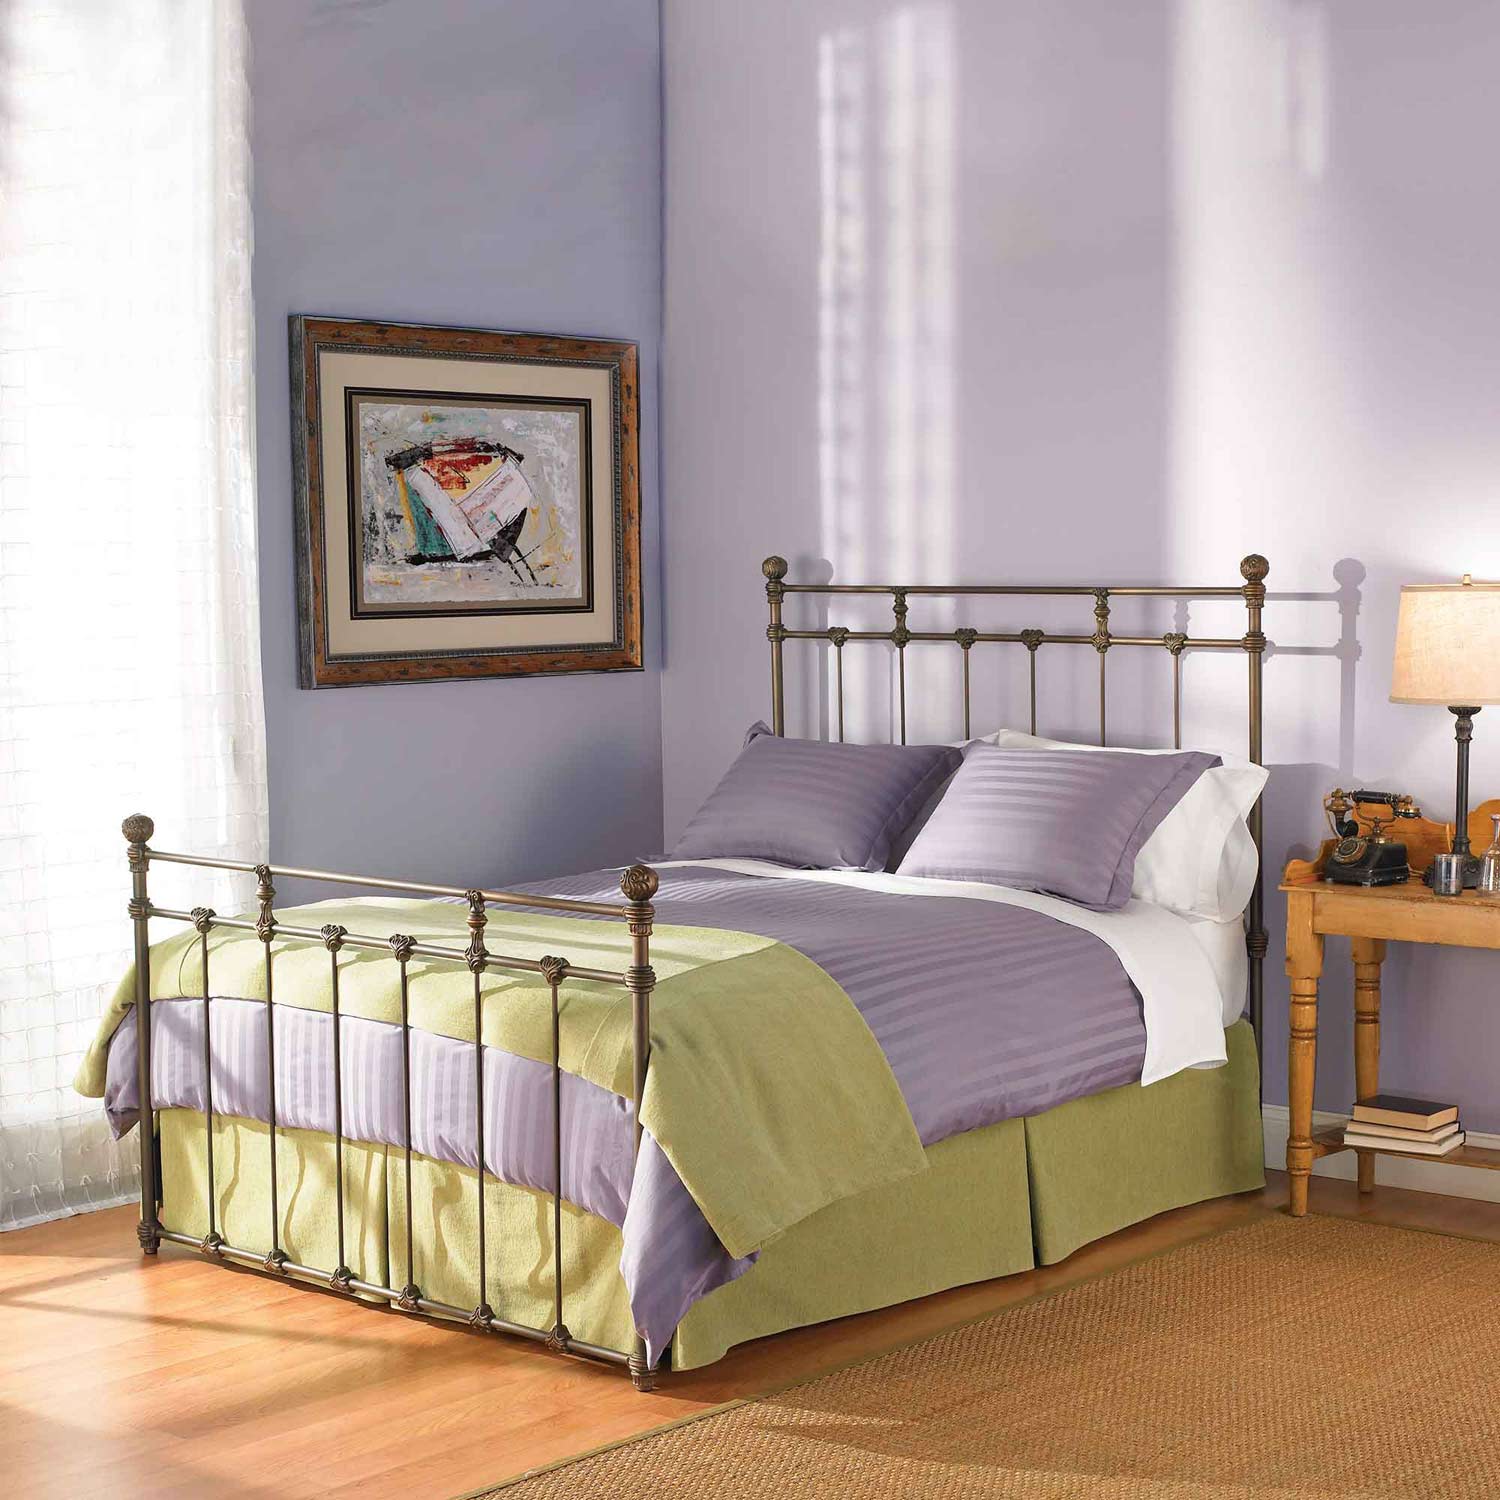 a bedroom with purple walls and a metal bed frame